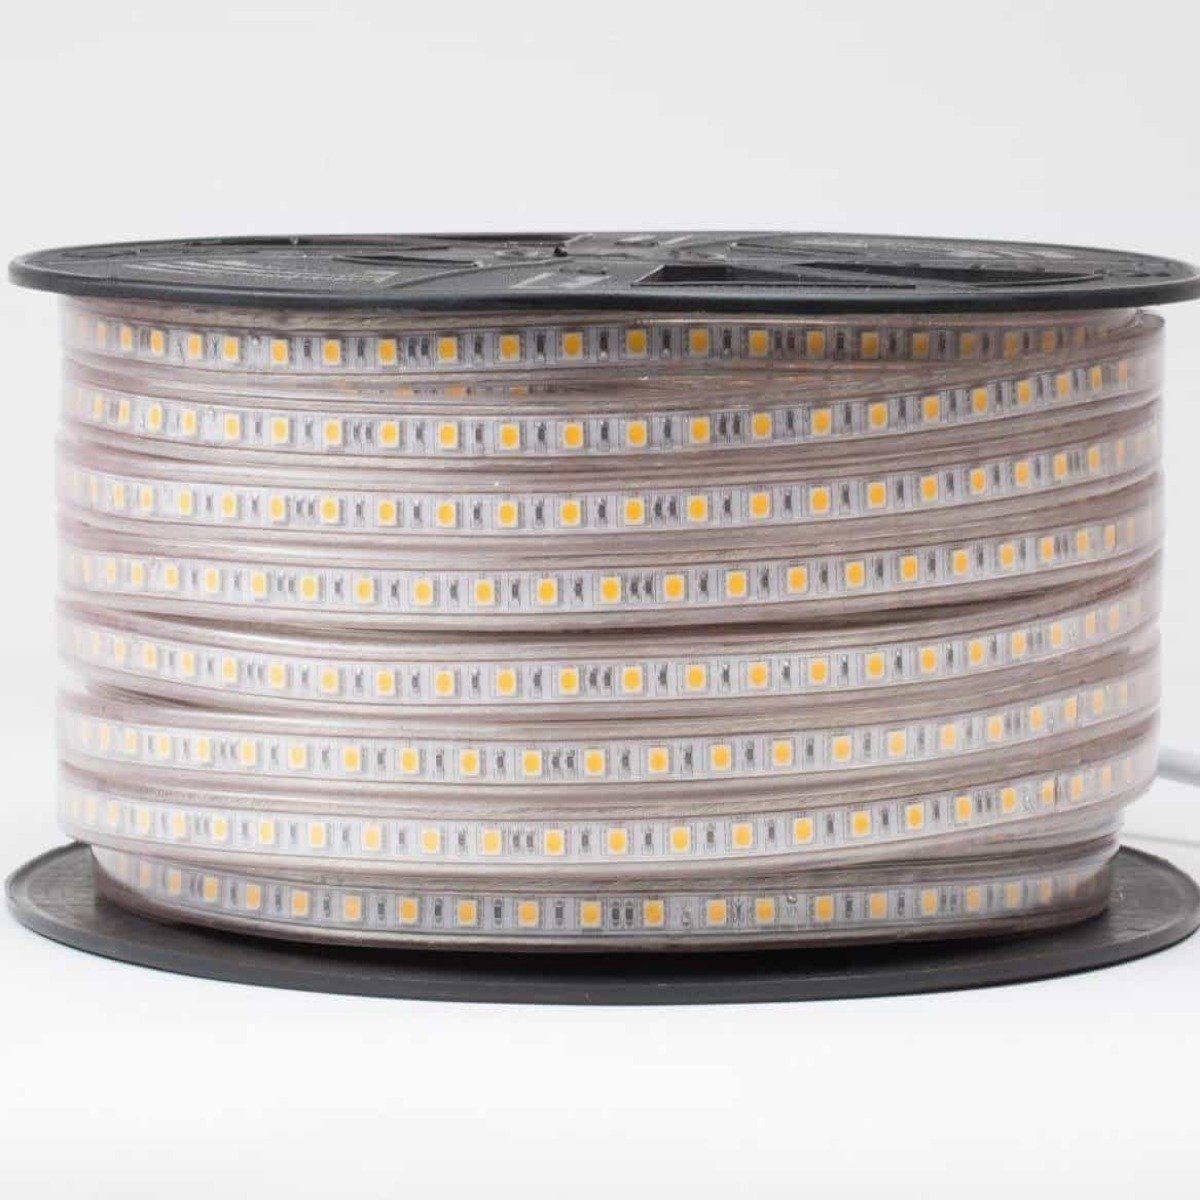 led strip light with visible yellow led chips wound tightly on black reel